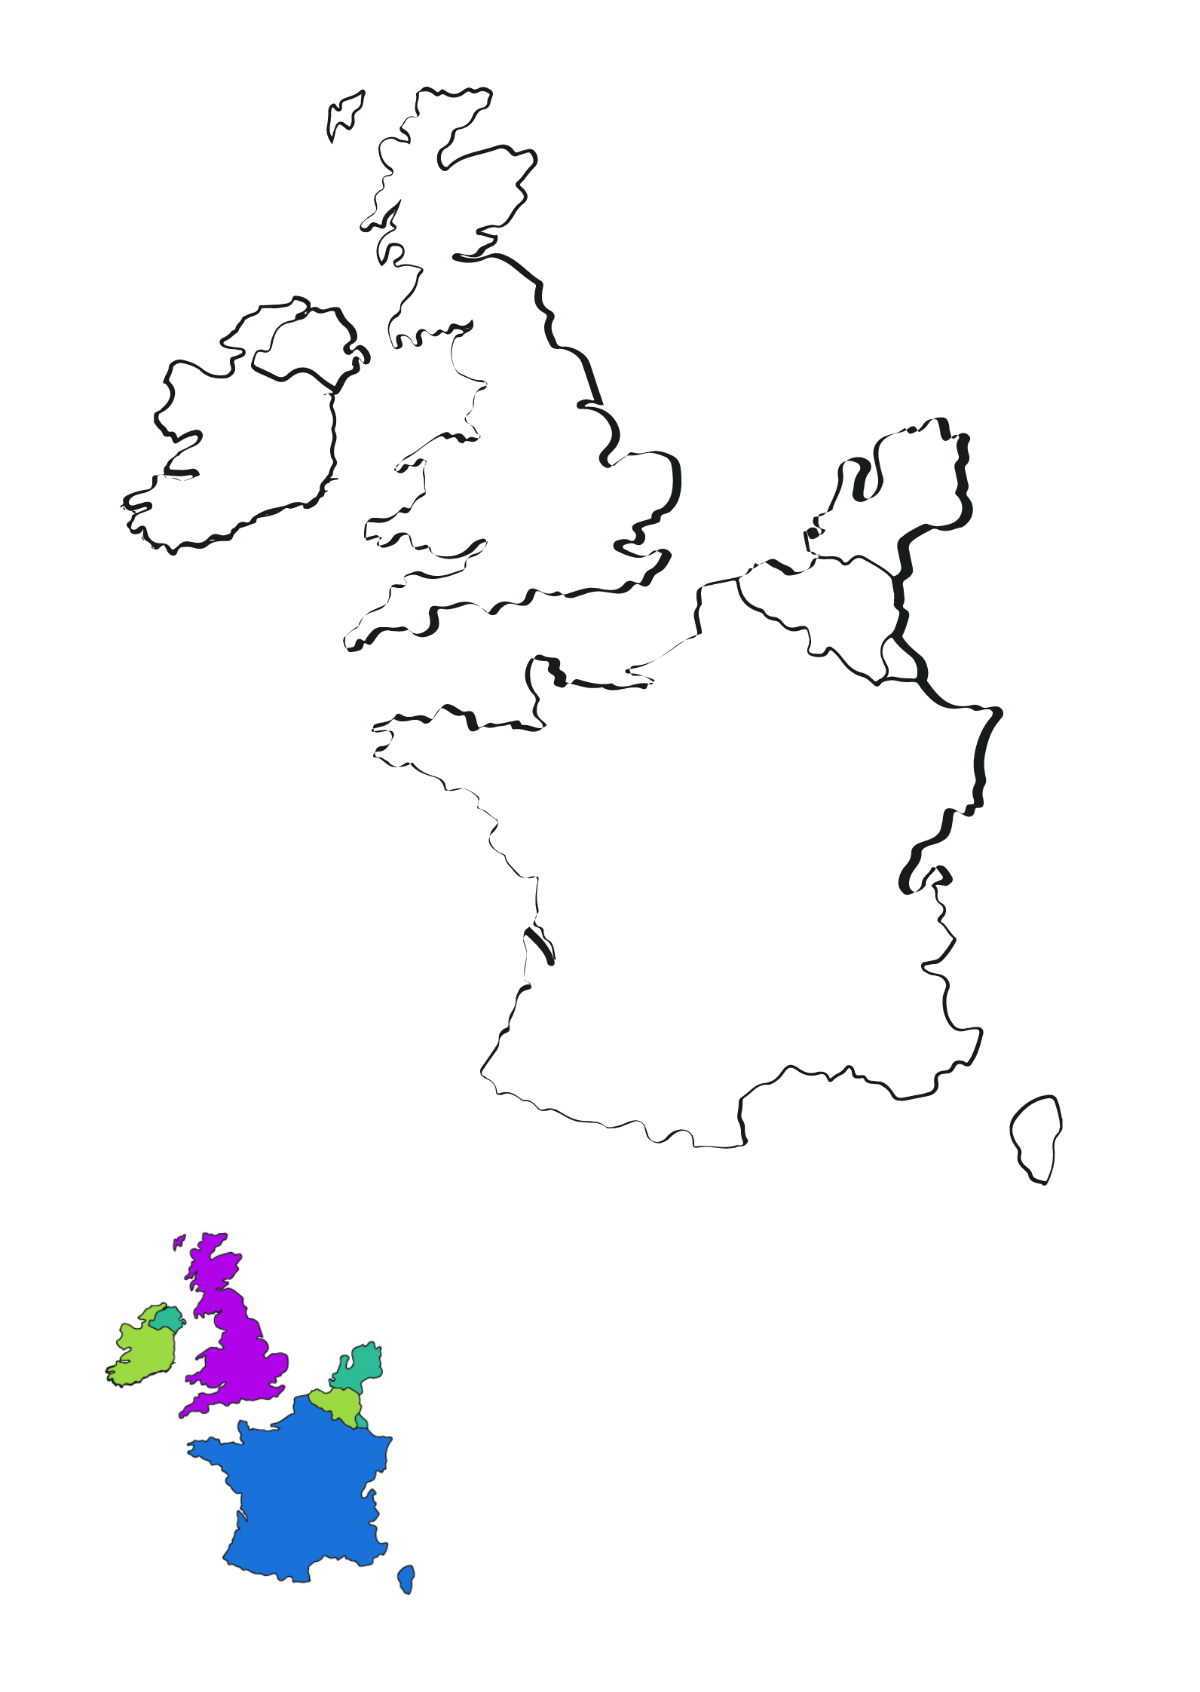 West Europe Map Coloring Page